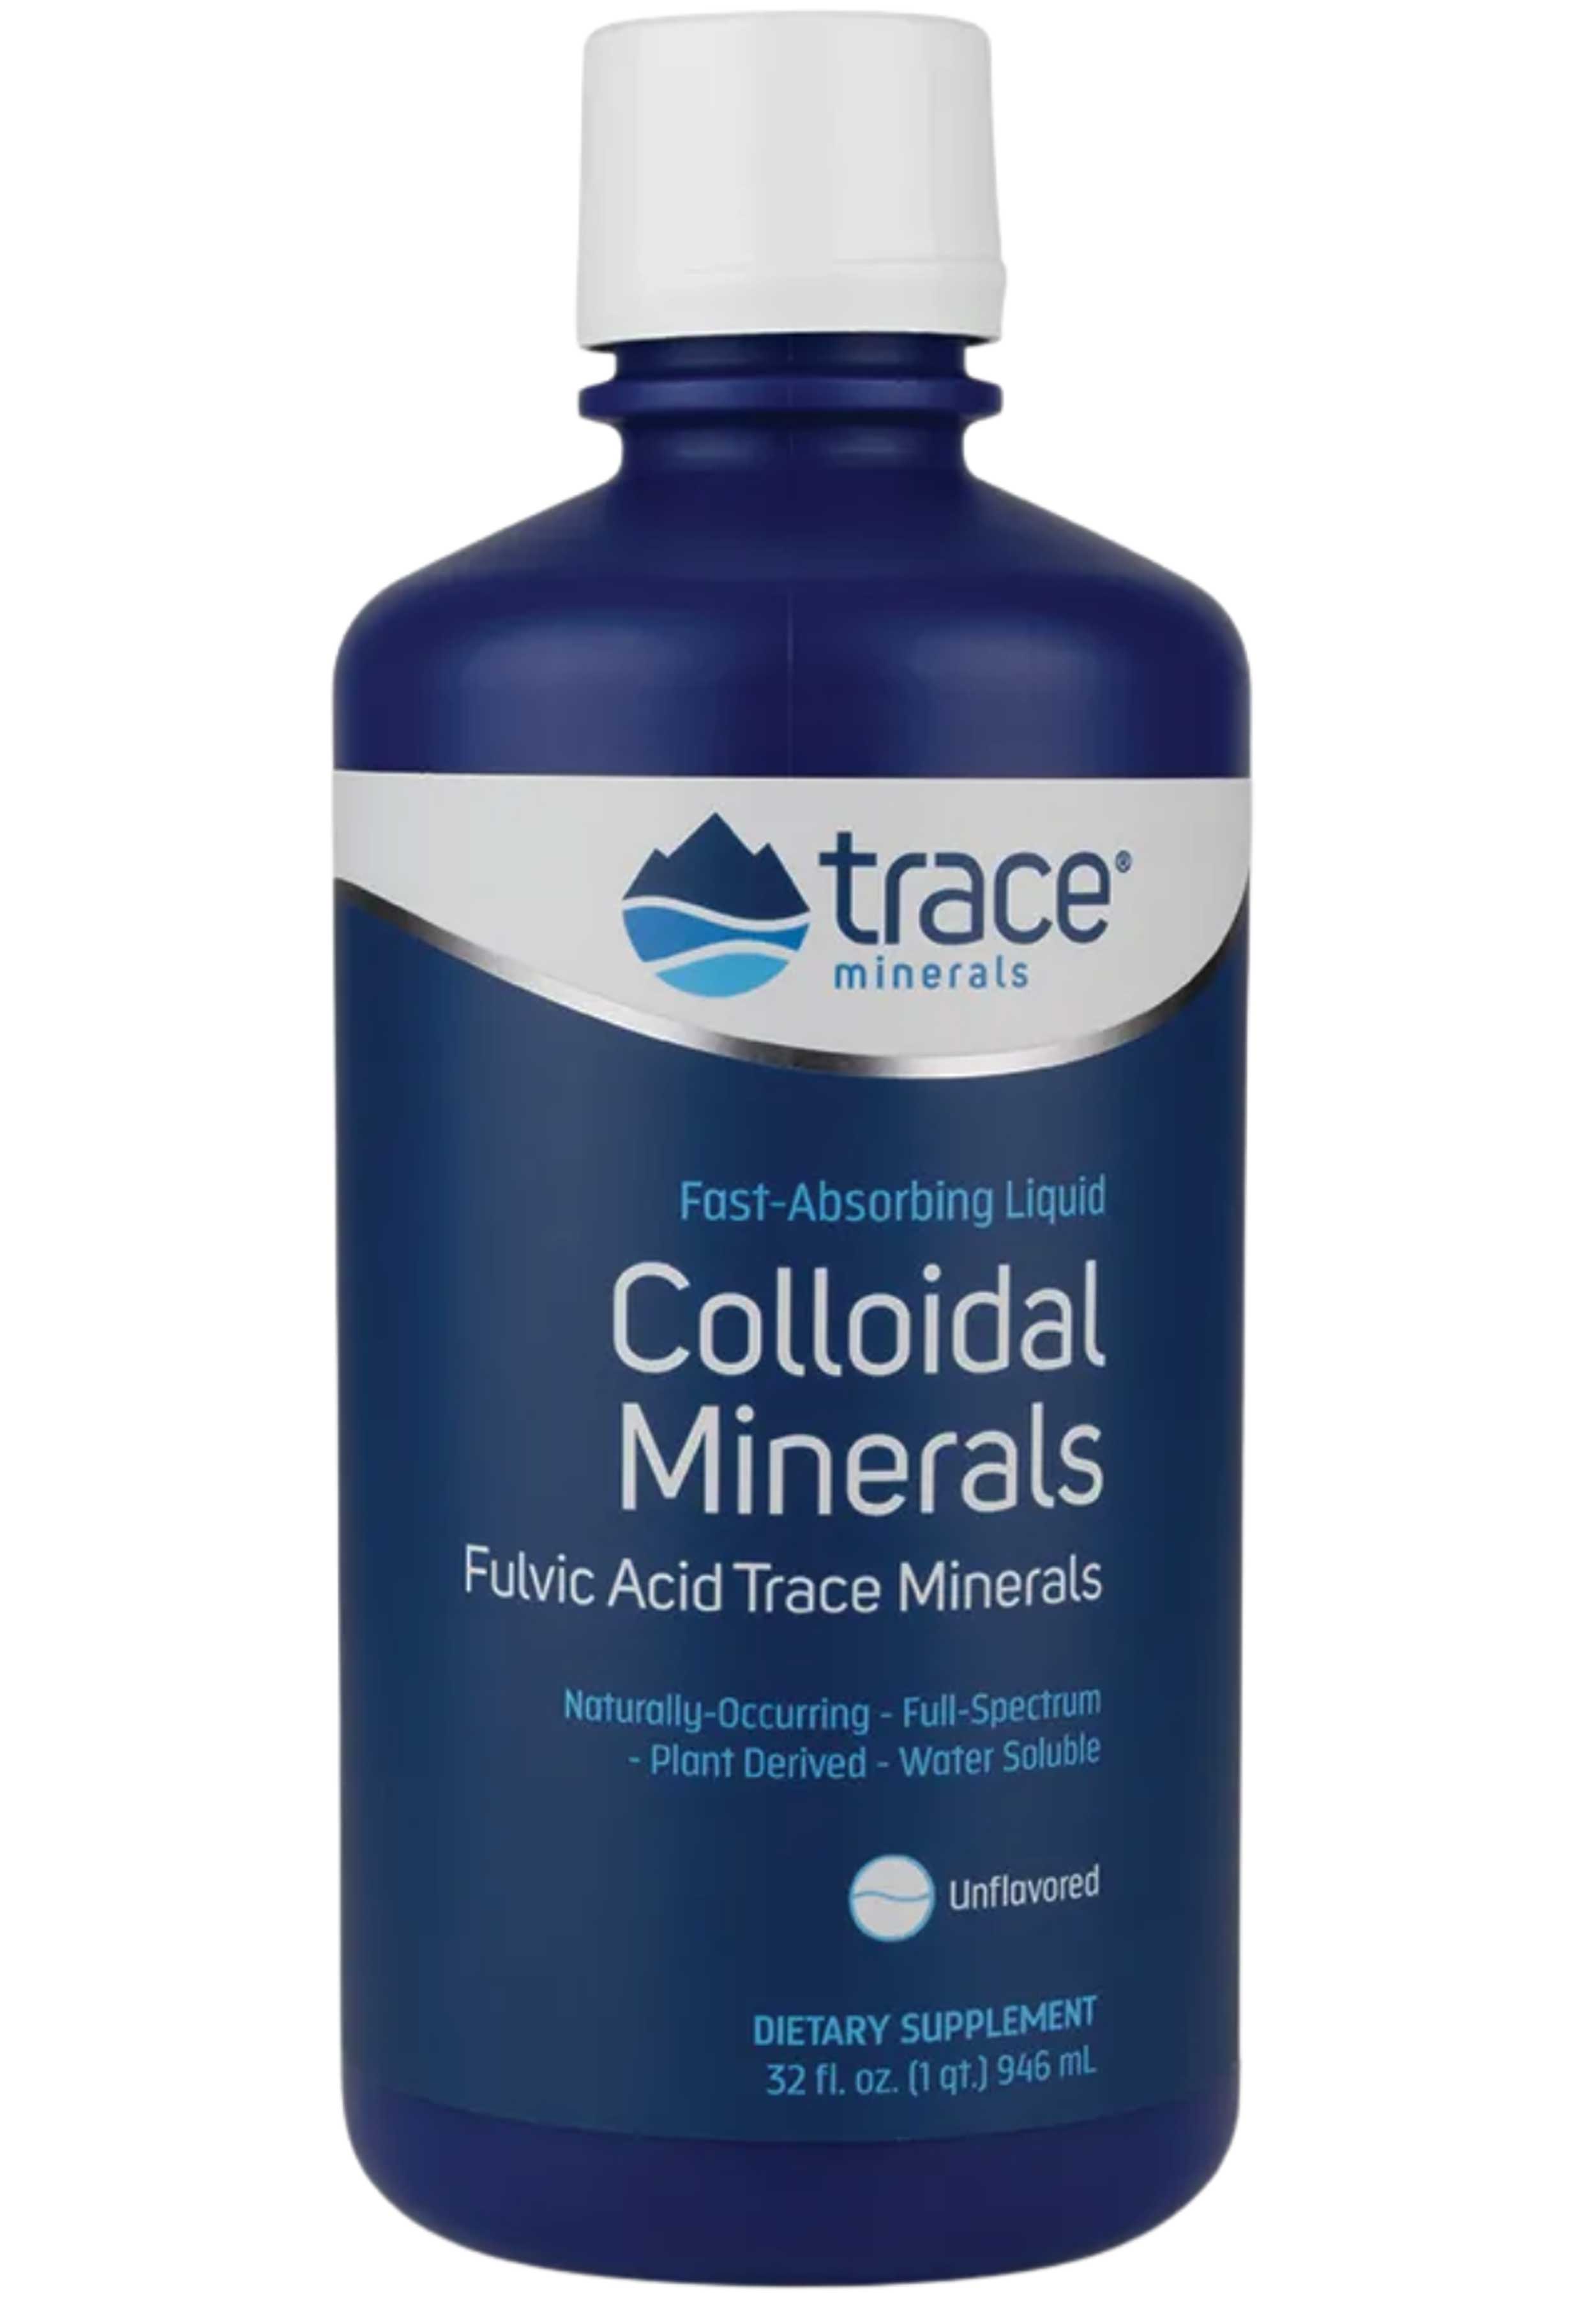 Trace Minerals Research Colloidal Minerals